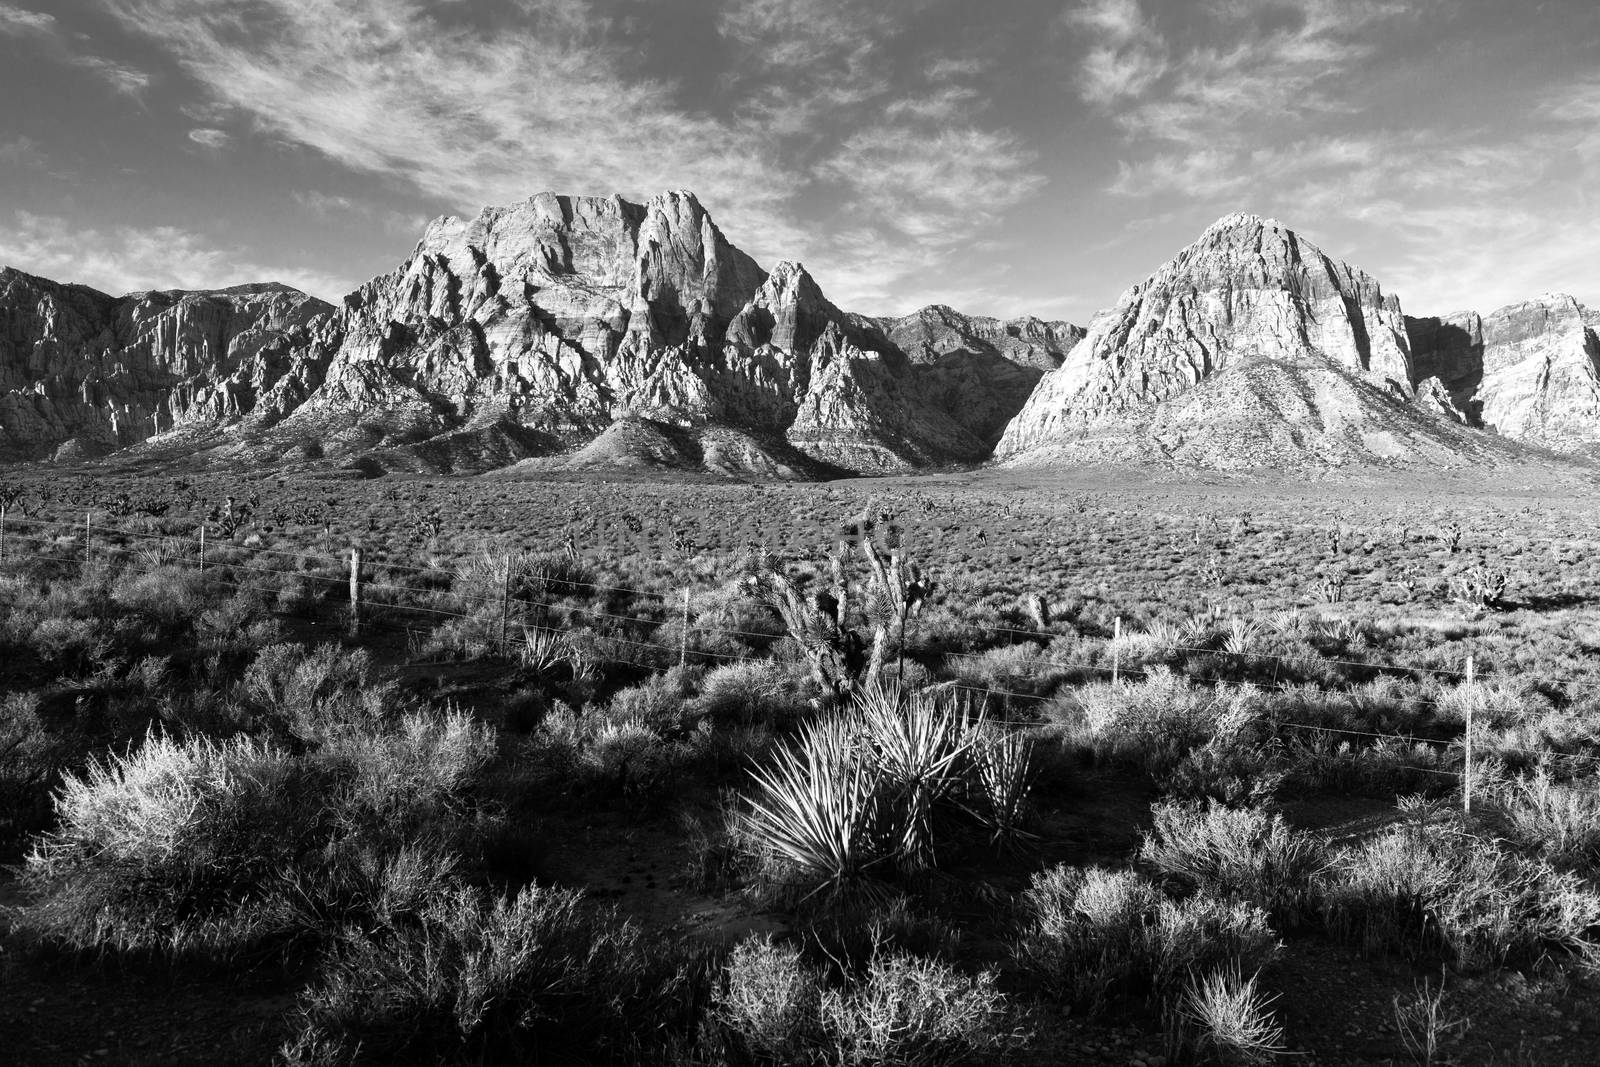 Geologic Rock Formations Red Rock Canyon Las Vegas USA by ChrisBoswell